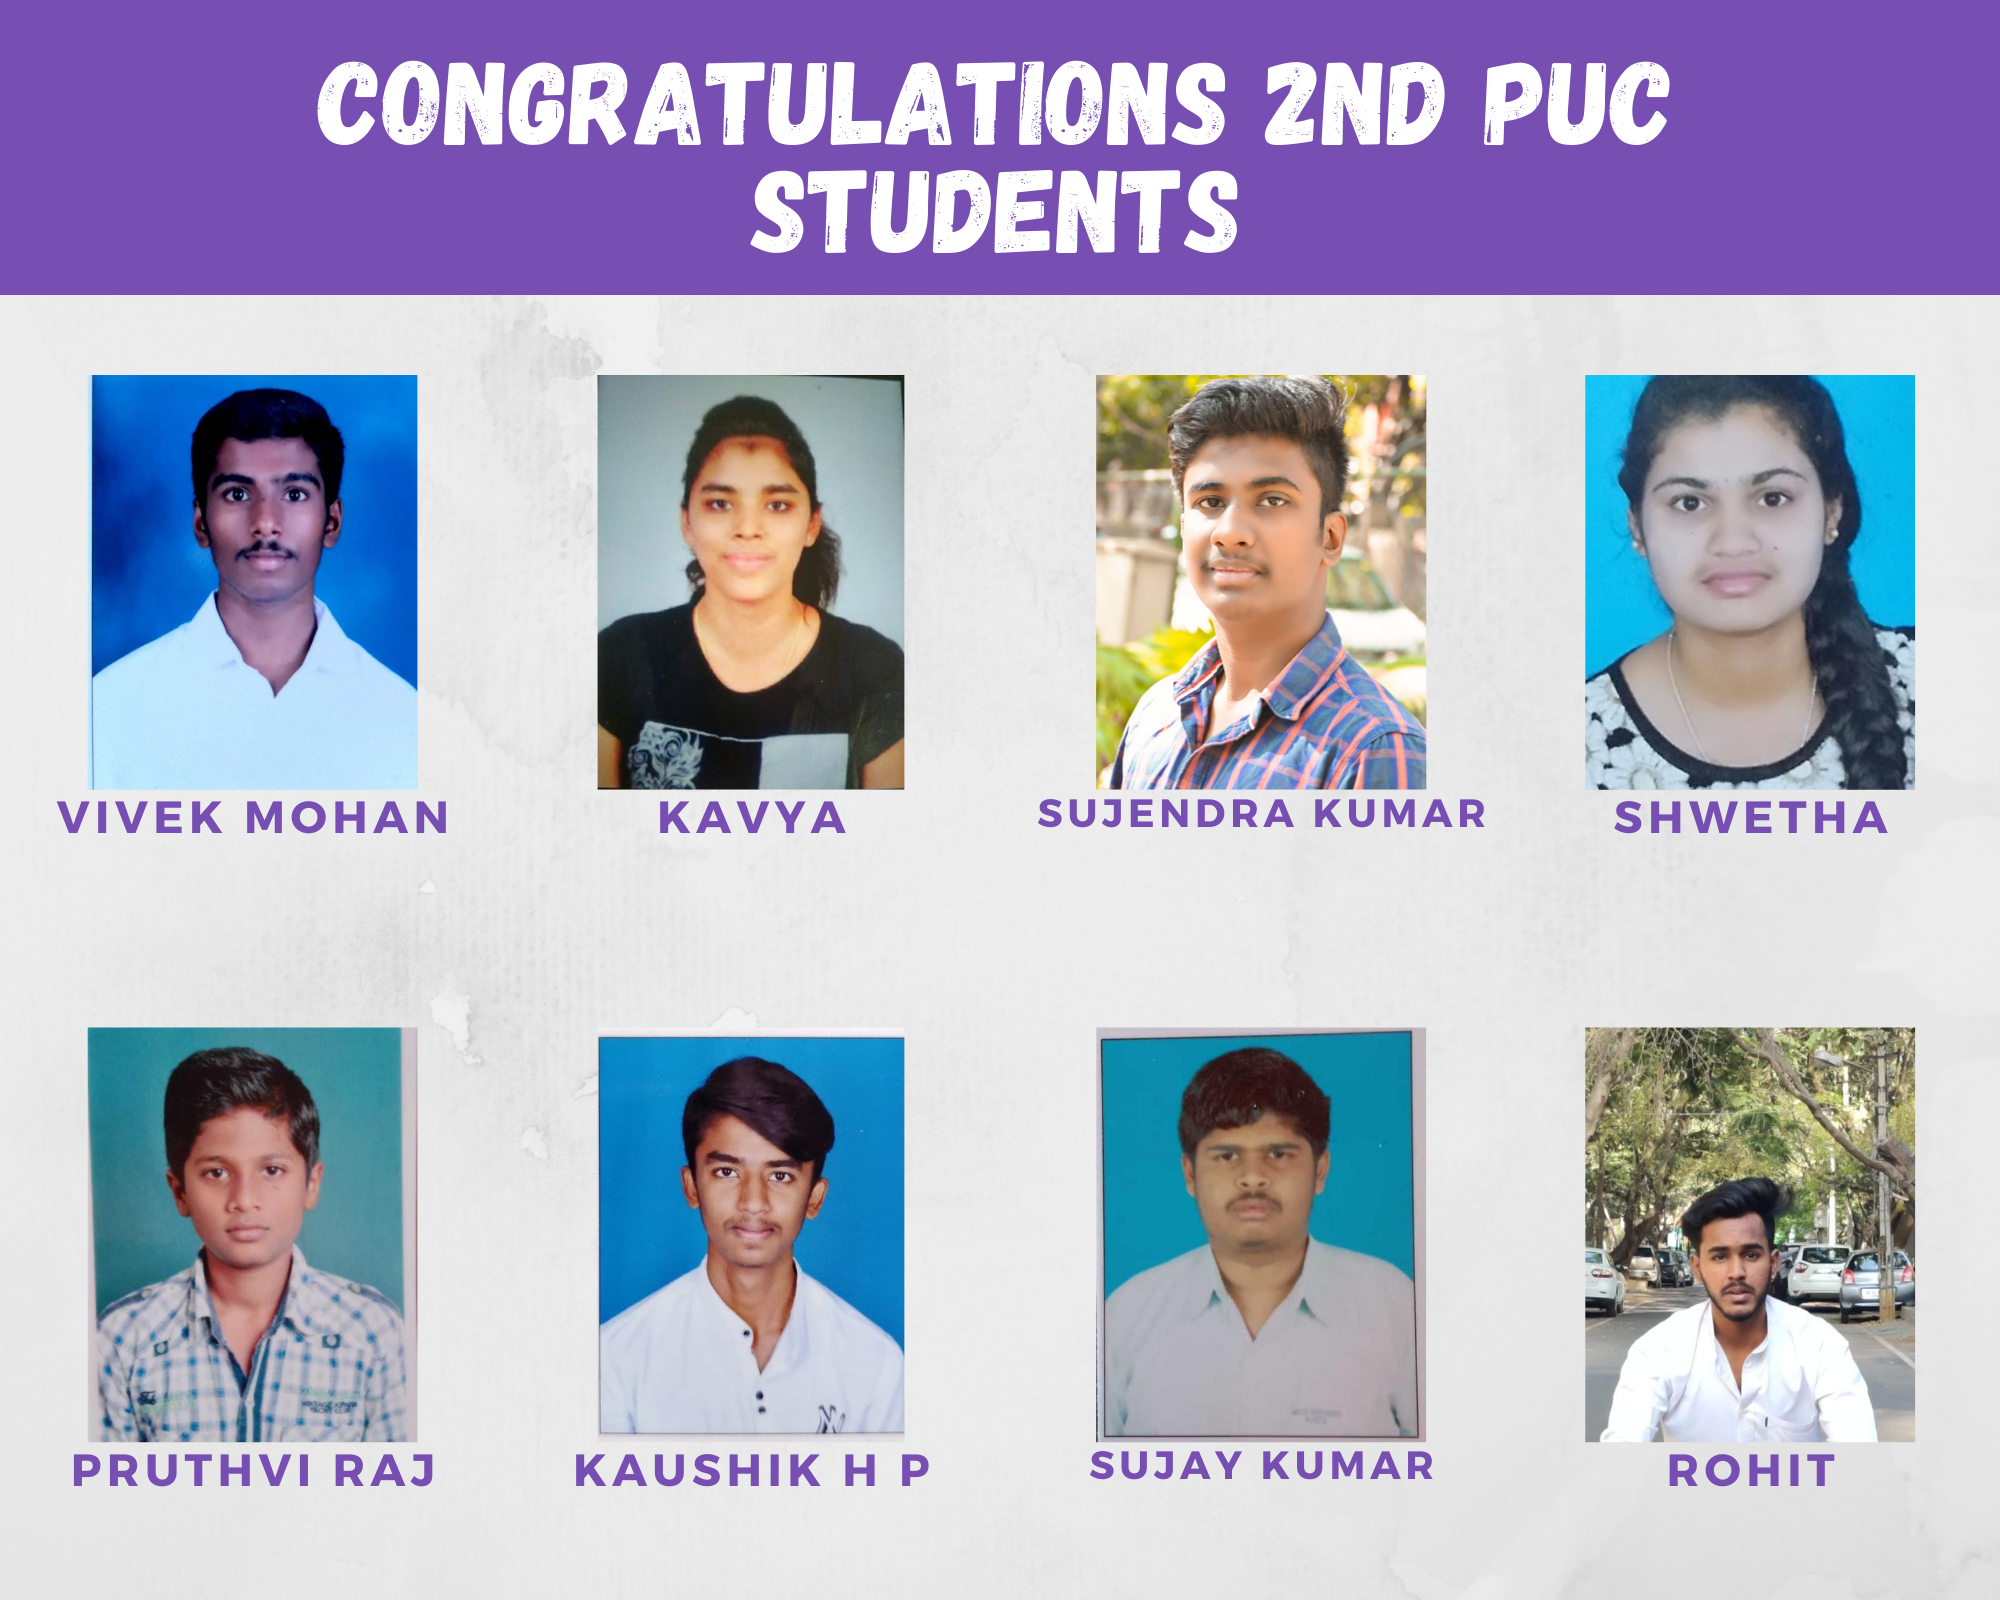 2nd PUC STUDENTS